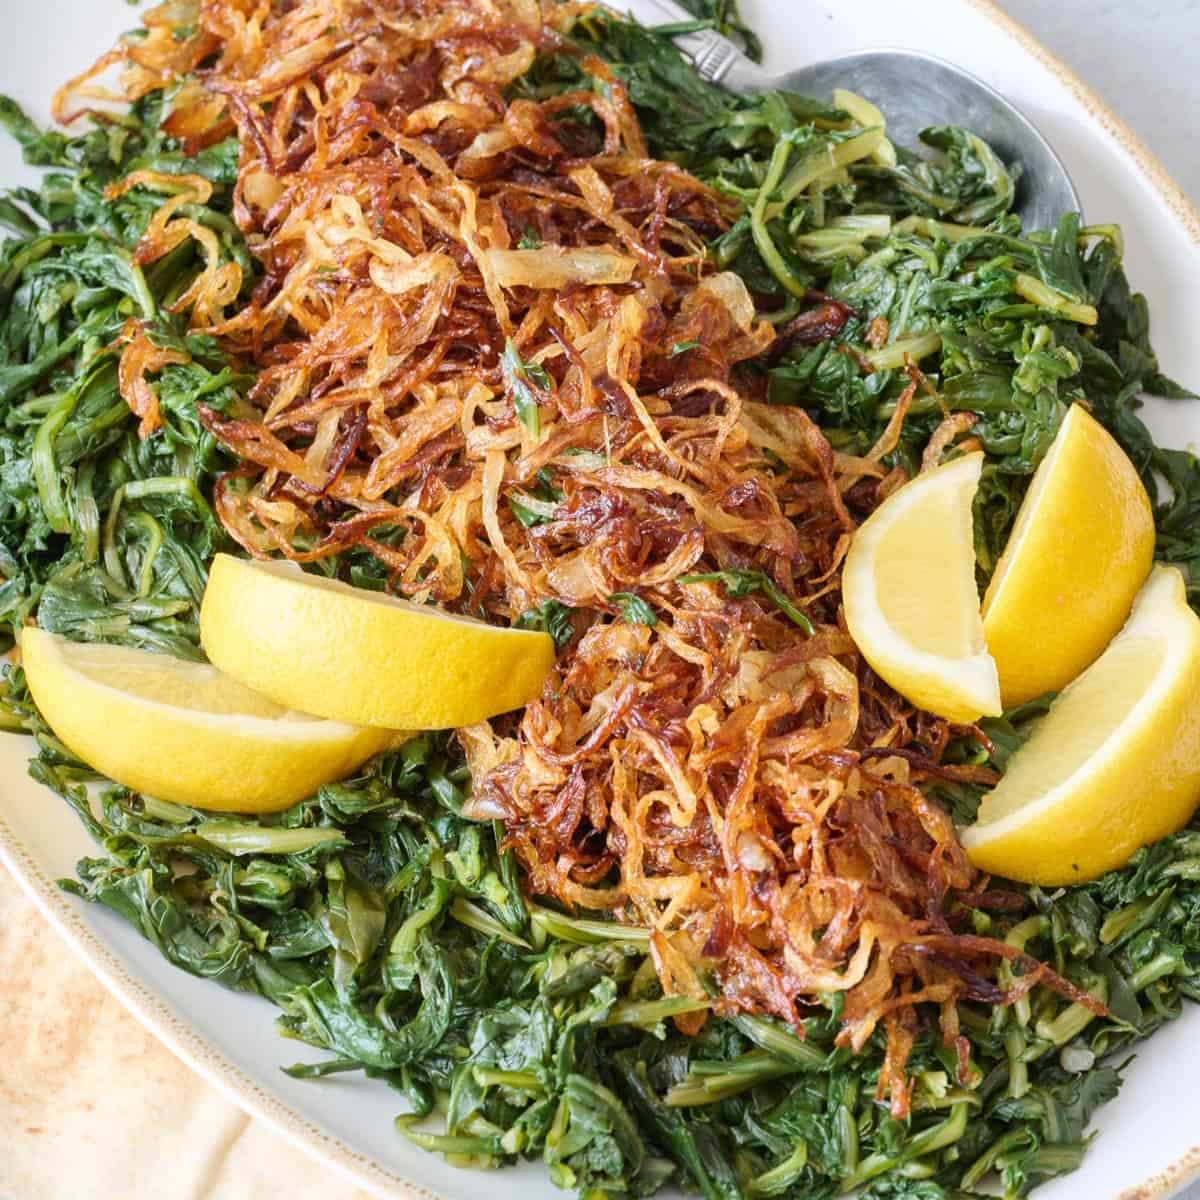 Dandelion greens with crispy fried onions on top, garnished with lemon wedges.